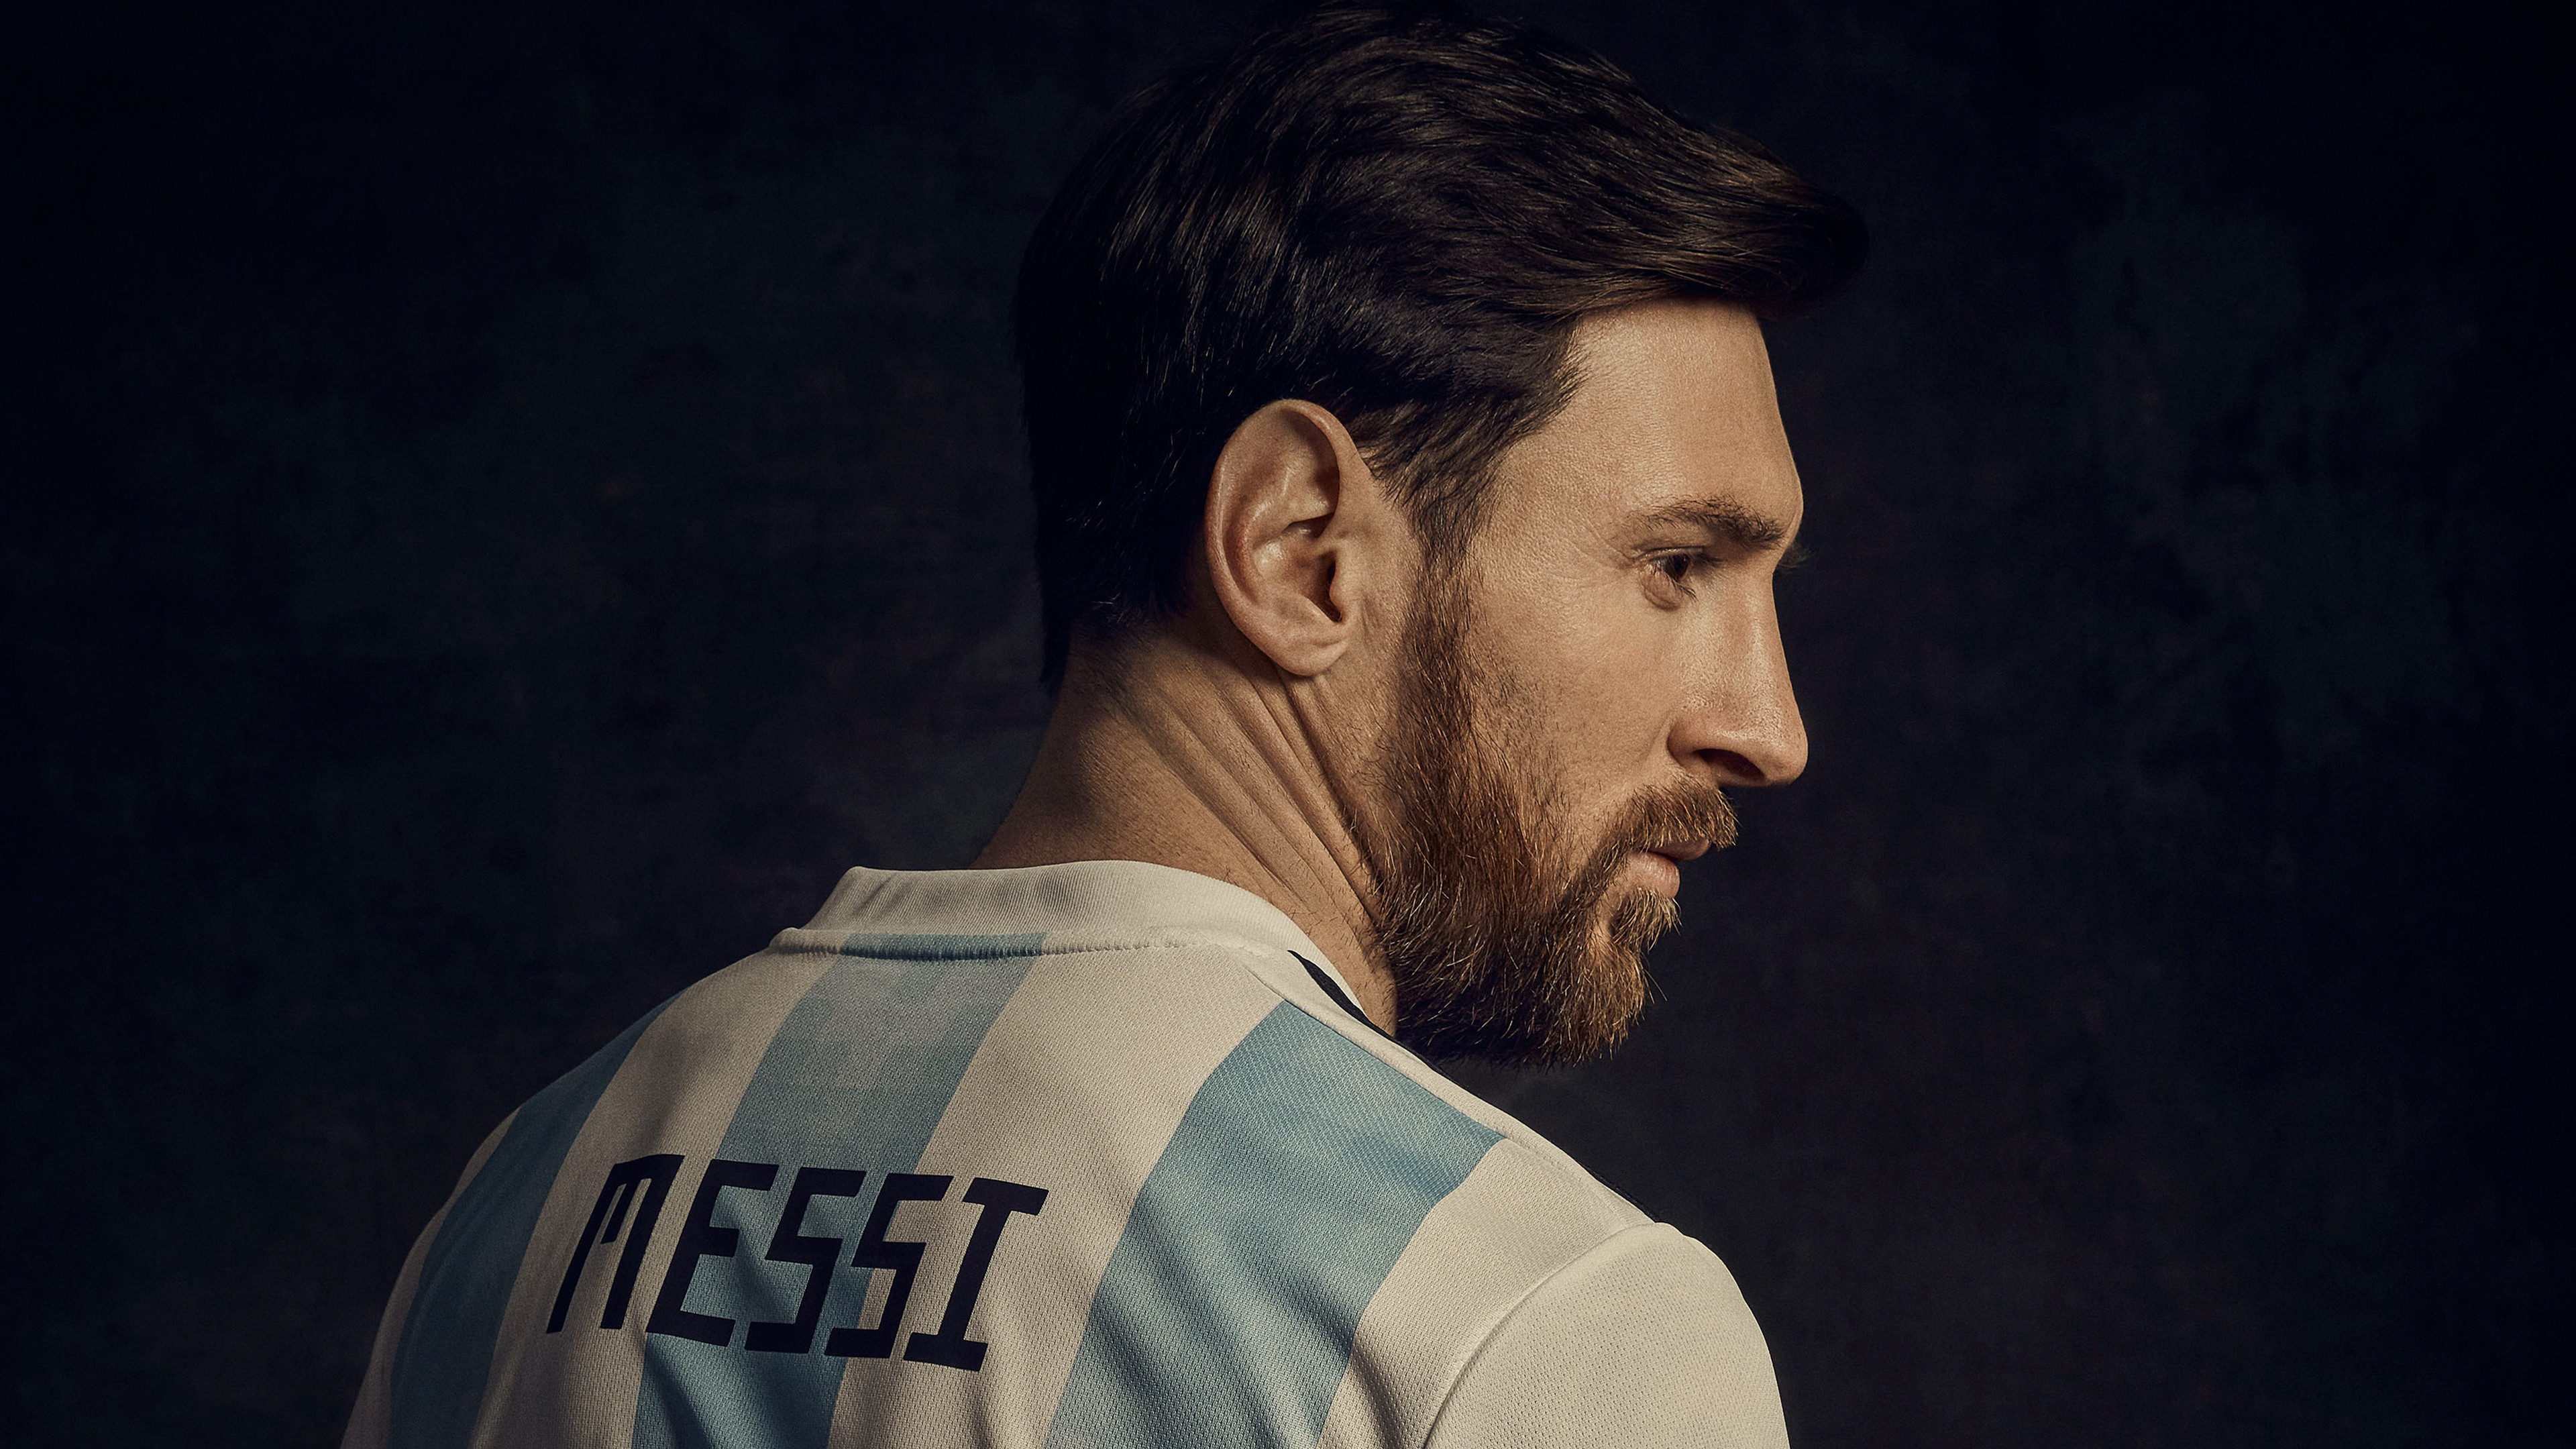 Lionel Messi 4K Wallpapers